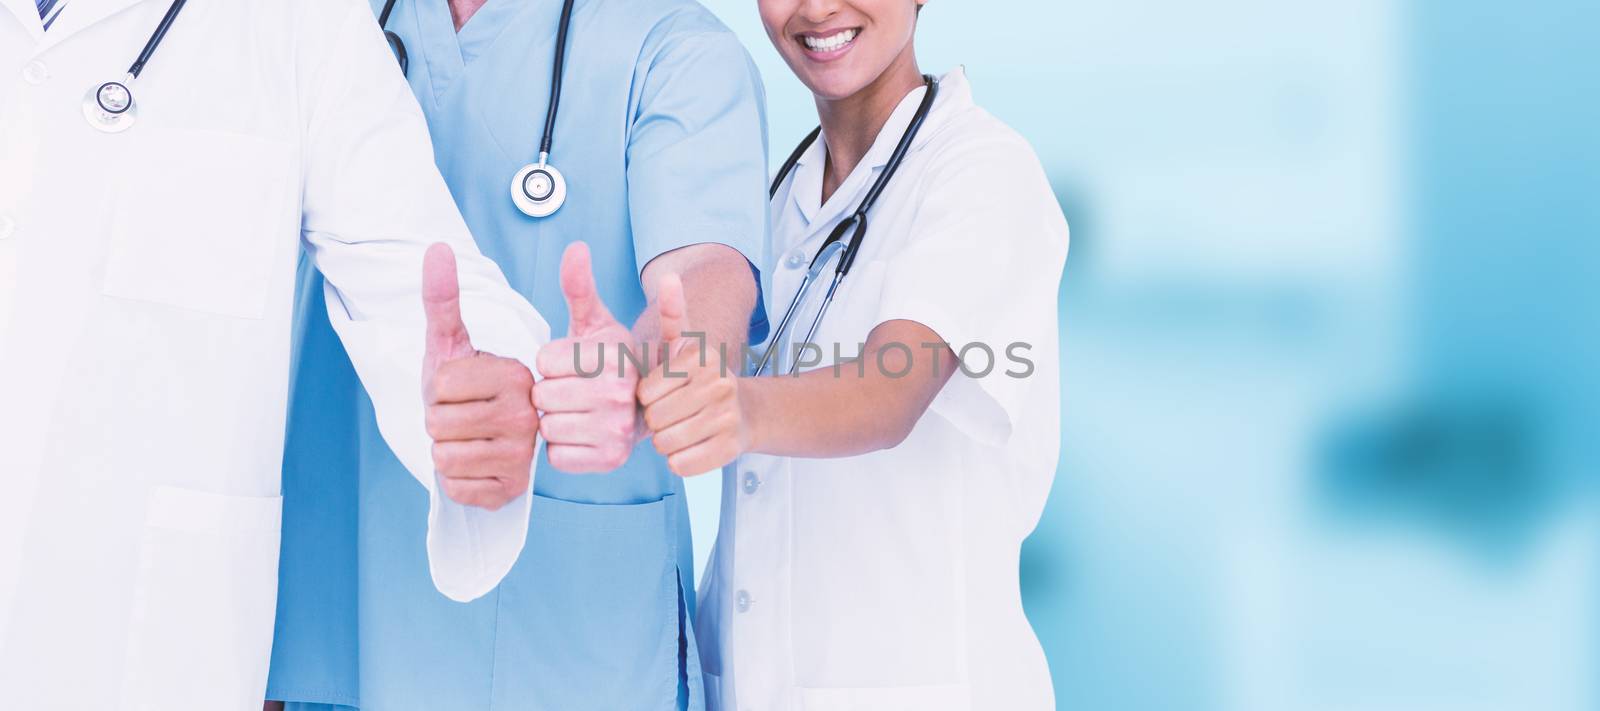 Portrait of smiling doctors with thumbs up against dental equipment